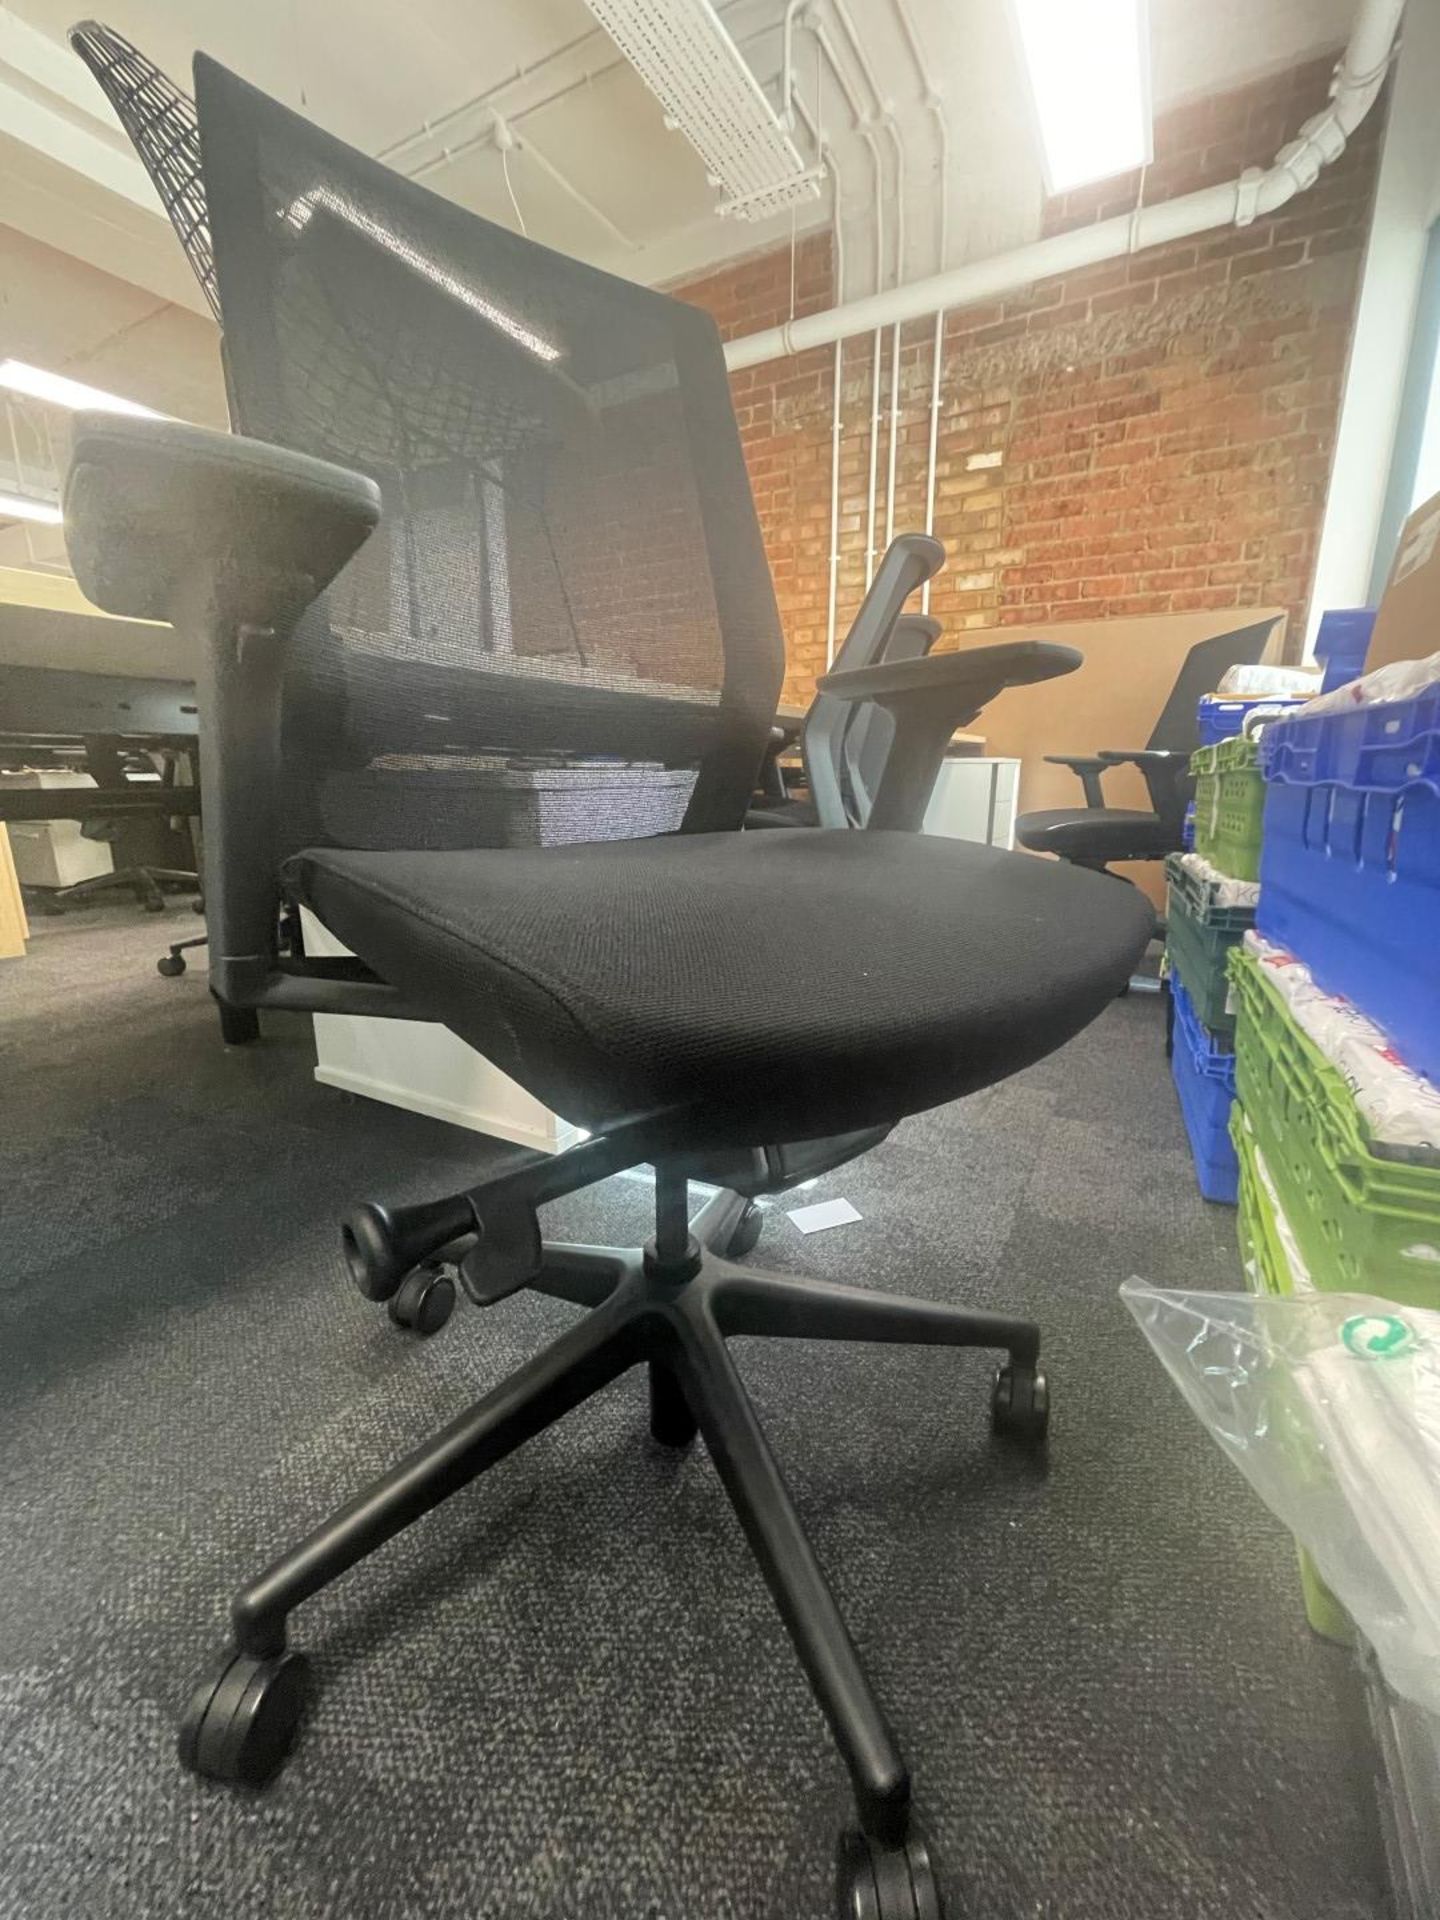 10 x BESTUHL J1 Ergonomic Office Chairs - To Be Removed From An Executive Office Environment - - Image 5 of 15